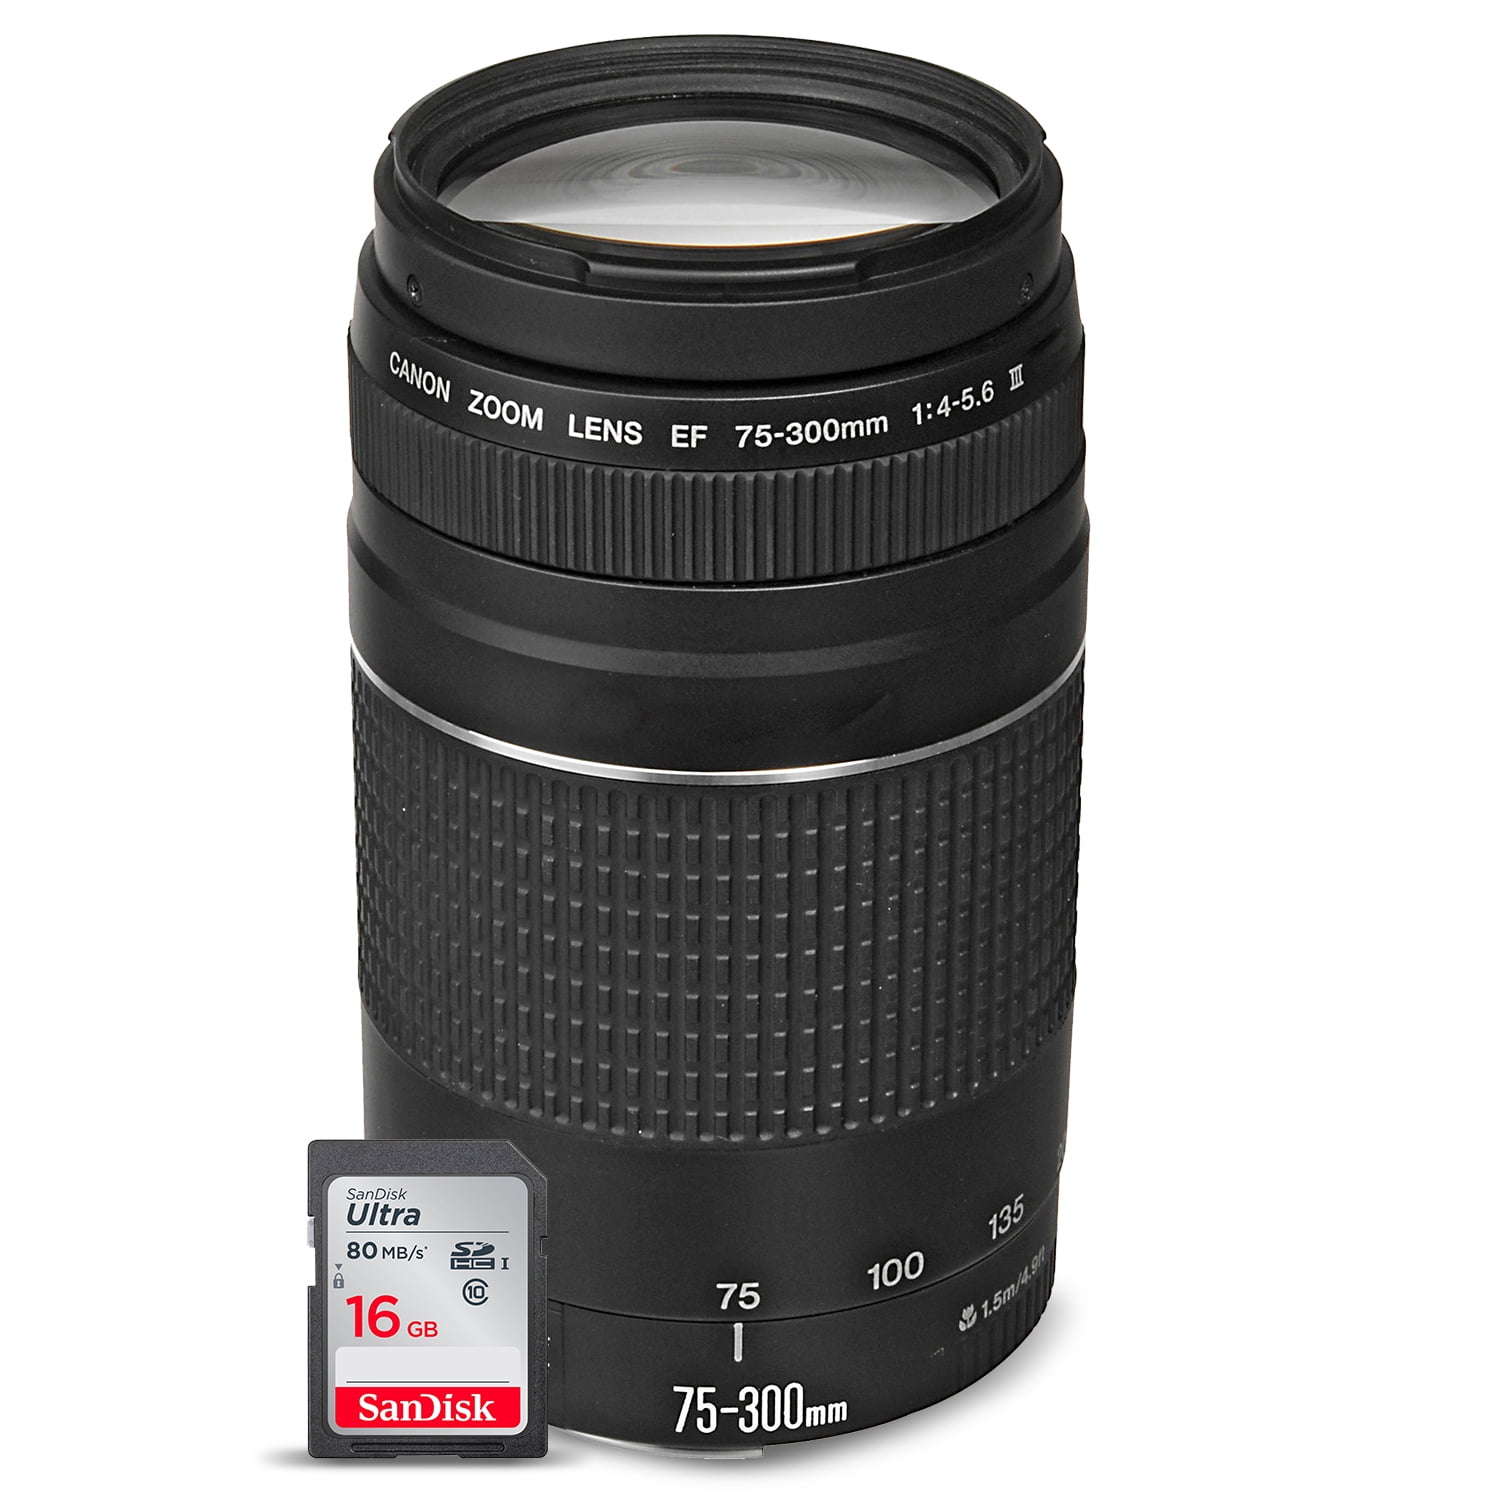 Canon EF 75-300mm f/4-5.6 III Telephoto Zoom Lens for Canon DSLR